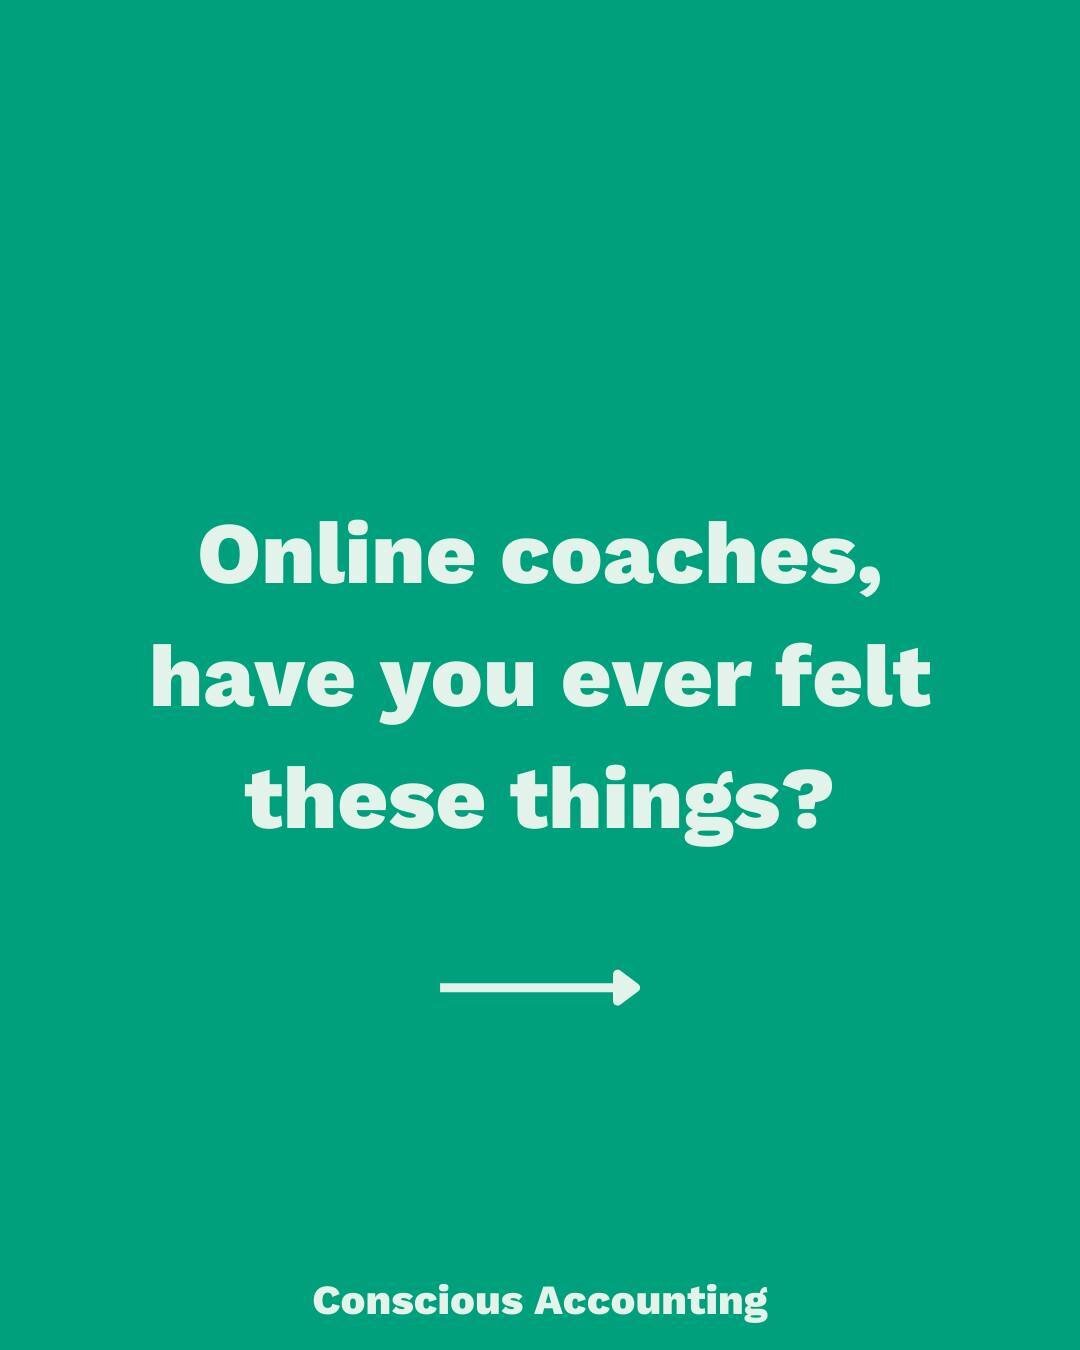 Online coaches, have you ever felt these things? 👉 

We help coaches with tax advice, planning, bookkeeping, and strategy. 

To put it simply, we are a team of CPAs who specialize in supporting online coaches! 
 
If you are looking for tax and bookk